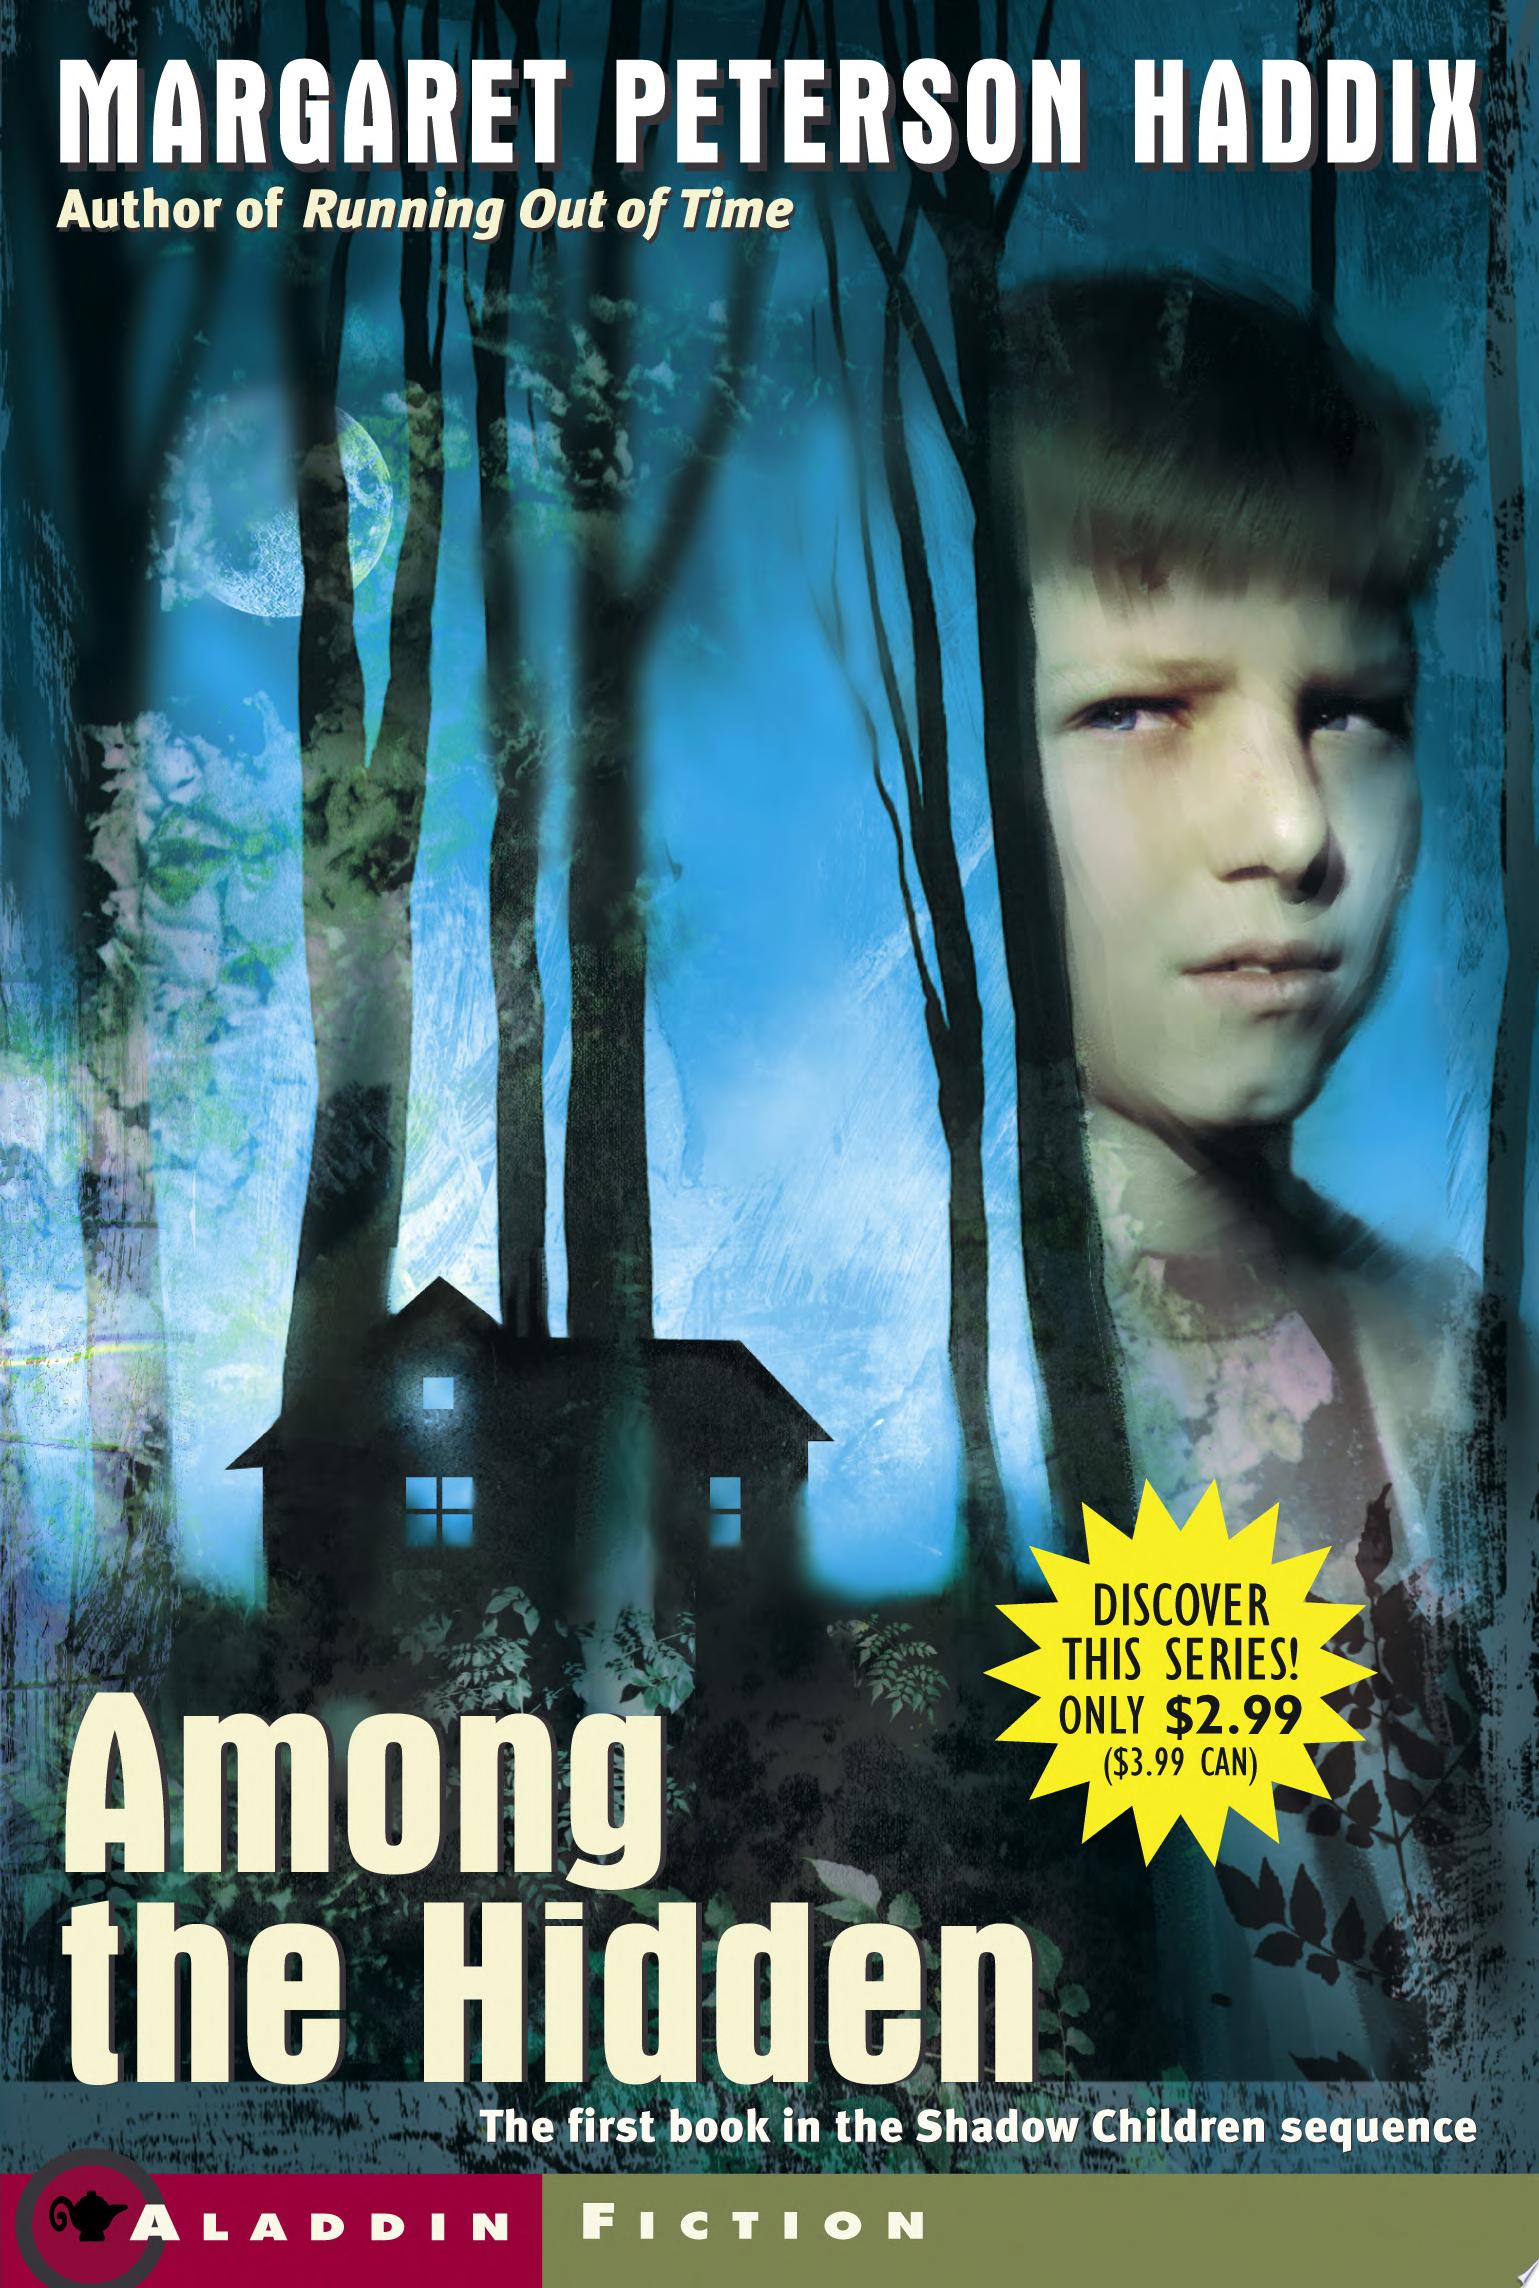 Image for "Among the Hidden"